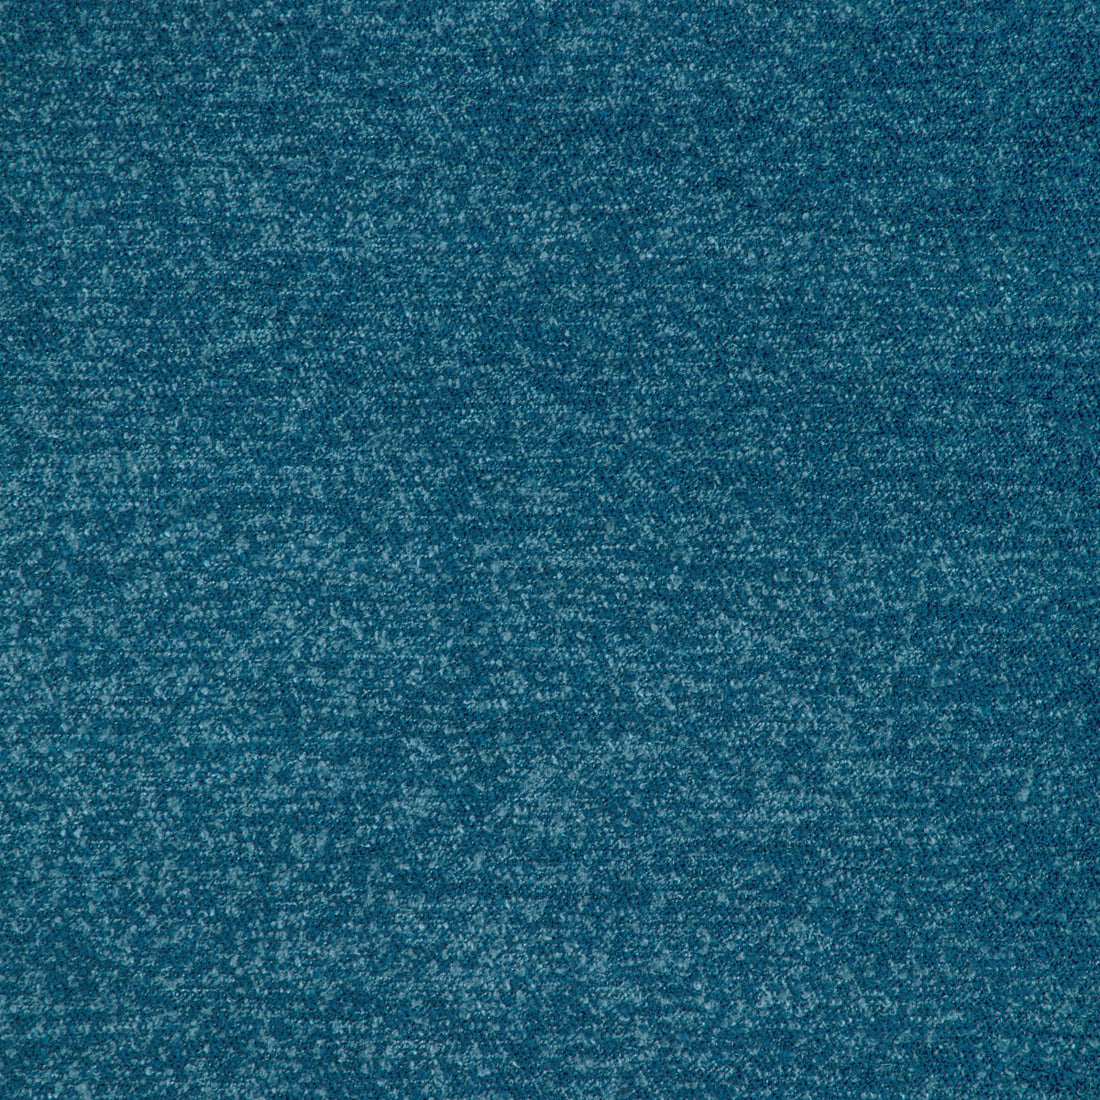 Rohe Boucle fabric in indigo color - pattern 36952.5.0 - by Kravet Basics in the Mid-Century Modern collection